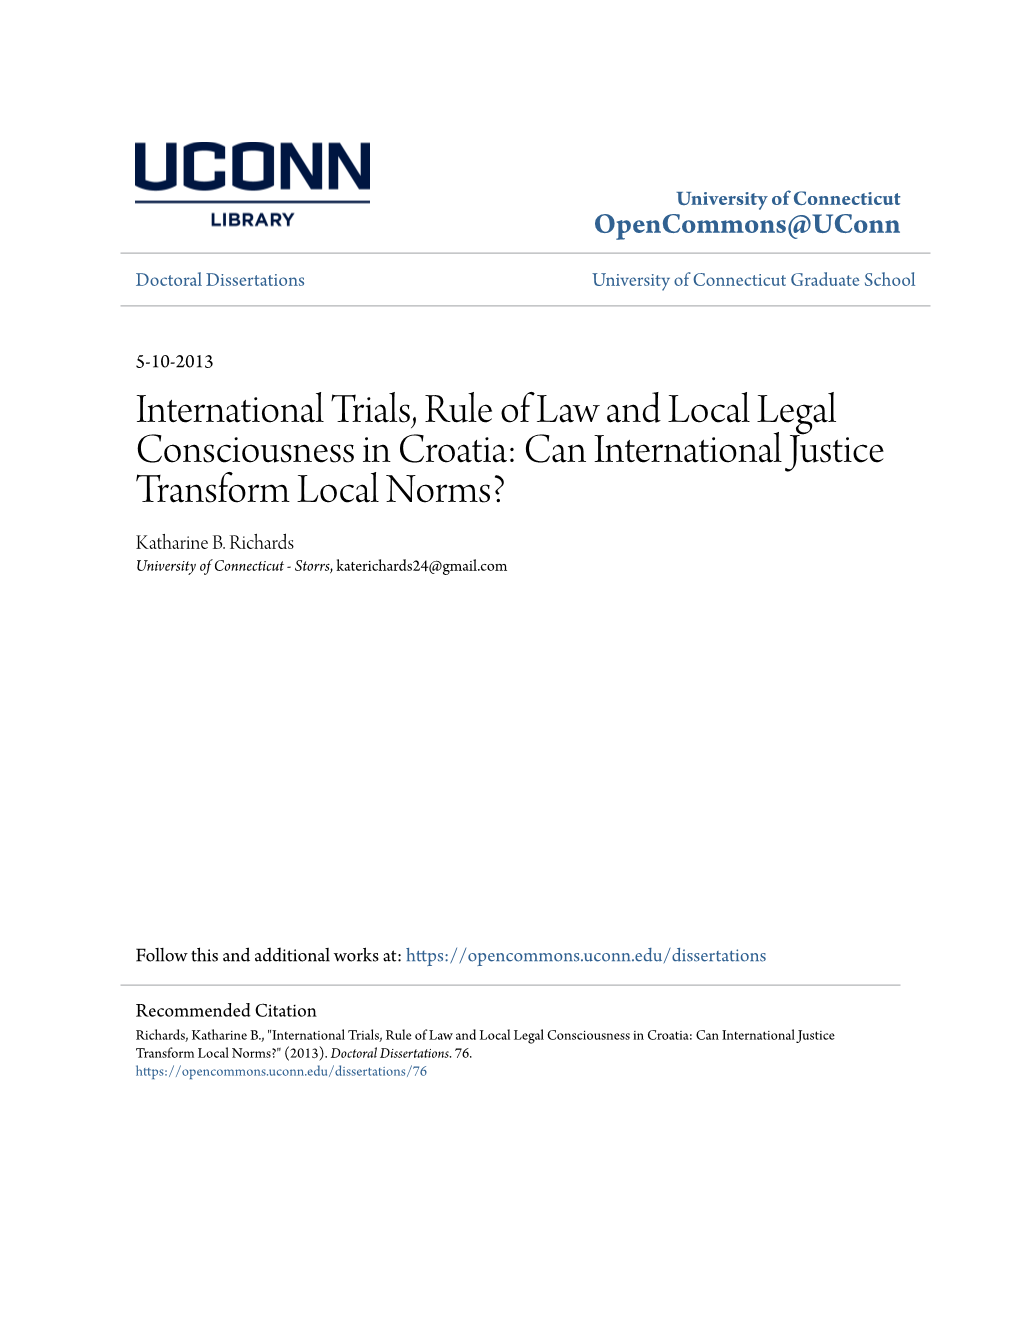 International Trials, Rule of Law and Local Legal Consciousness in Croatia: Can International Justice Transform Local Norms? Katharine B